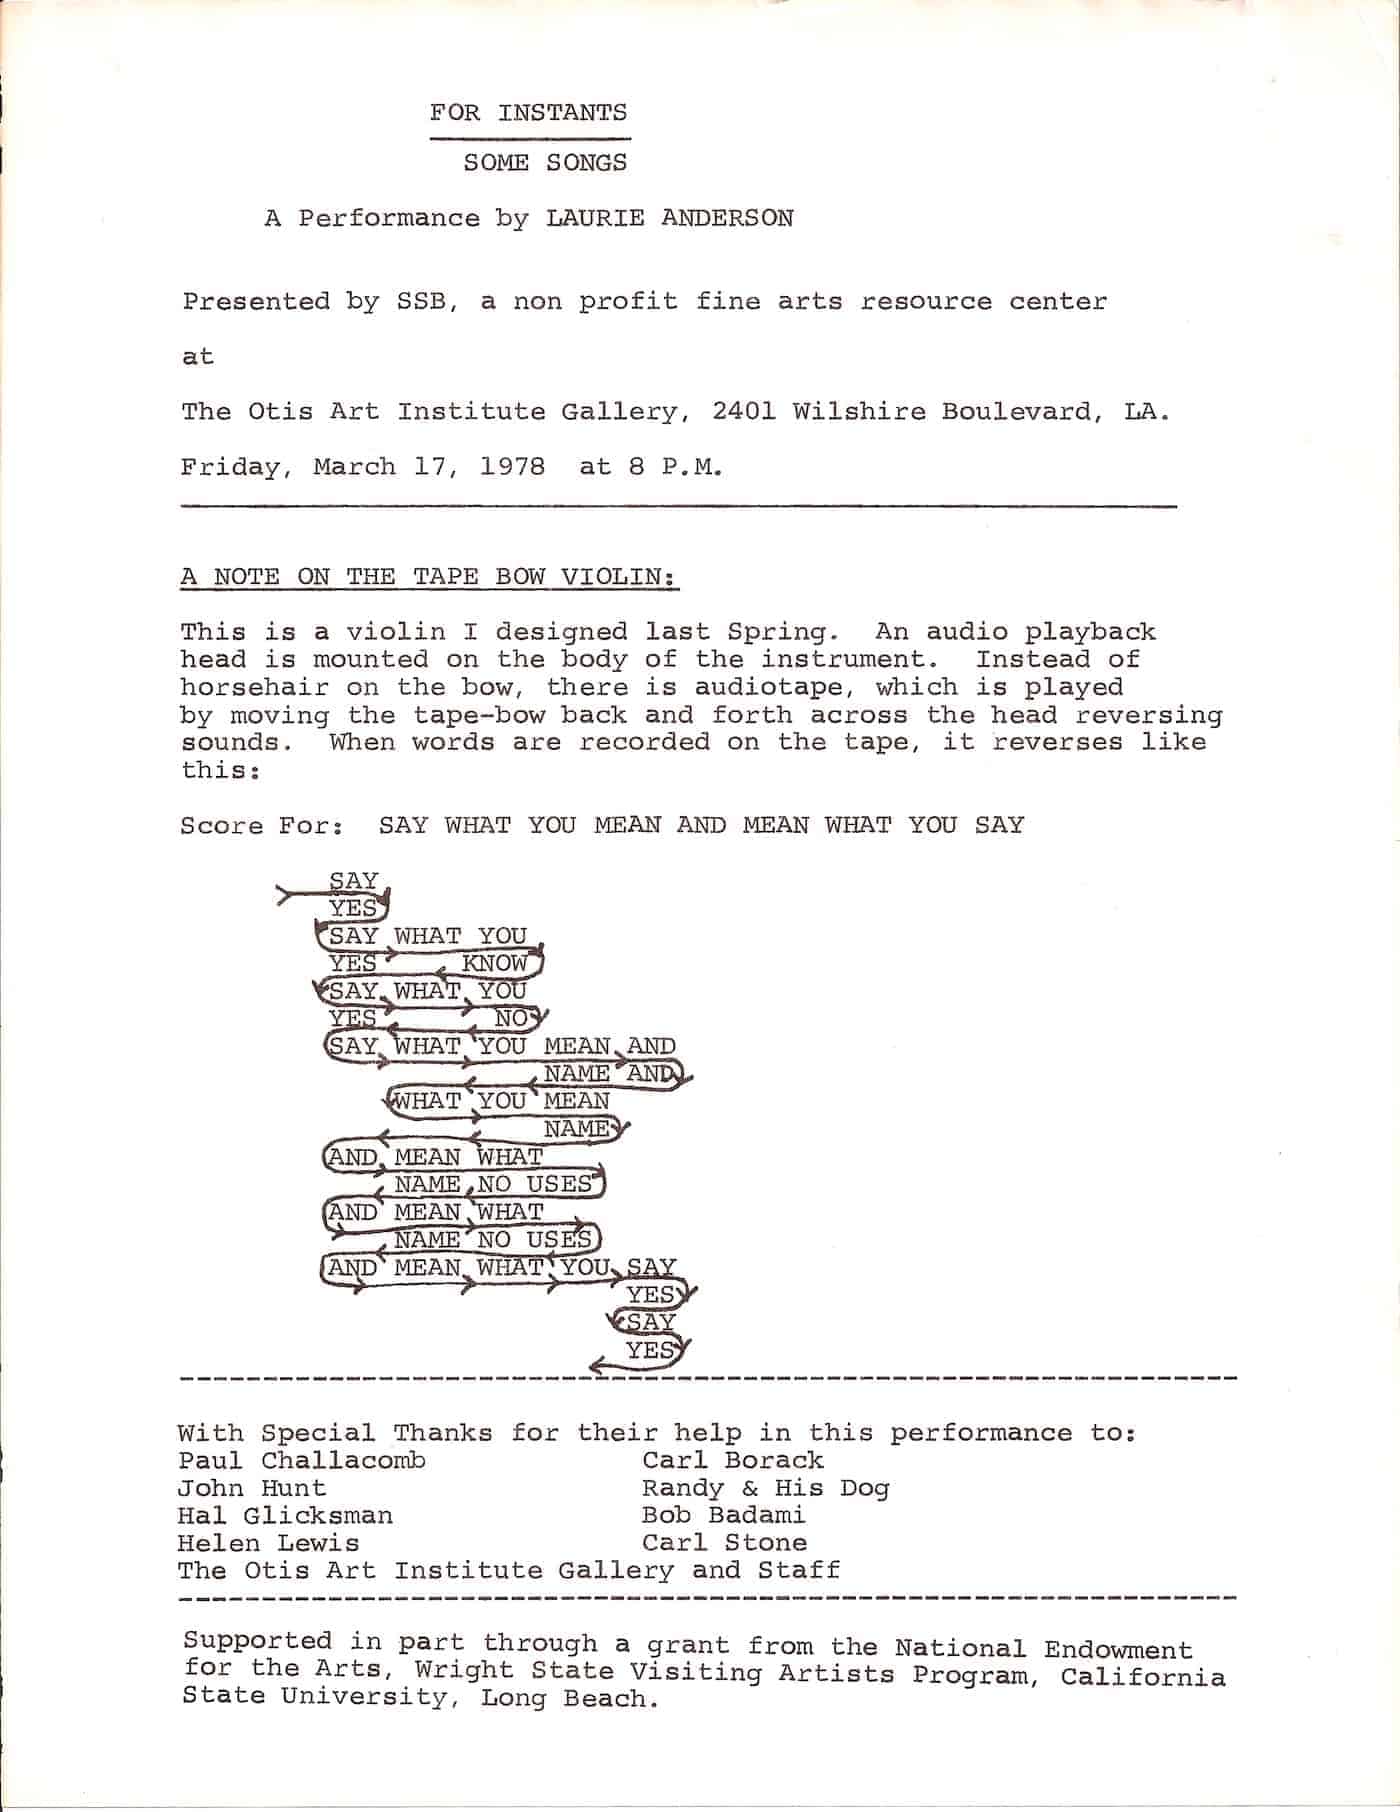 script for “For Instance” by Laurie Anderson, 1978